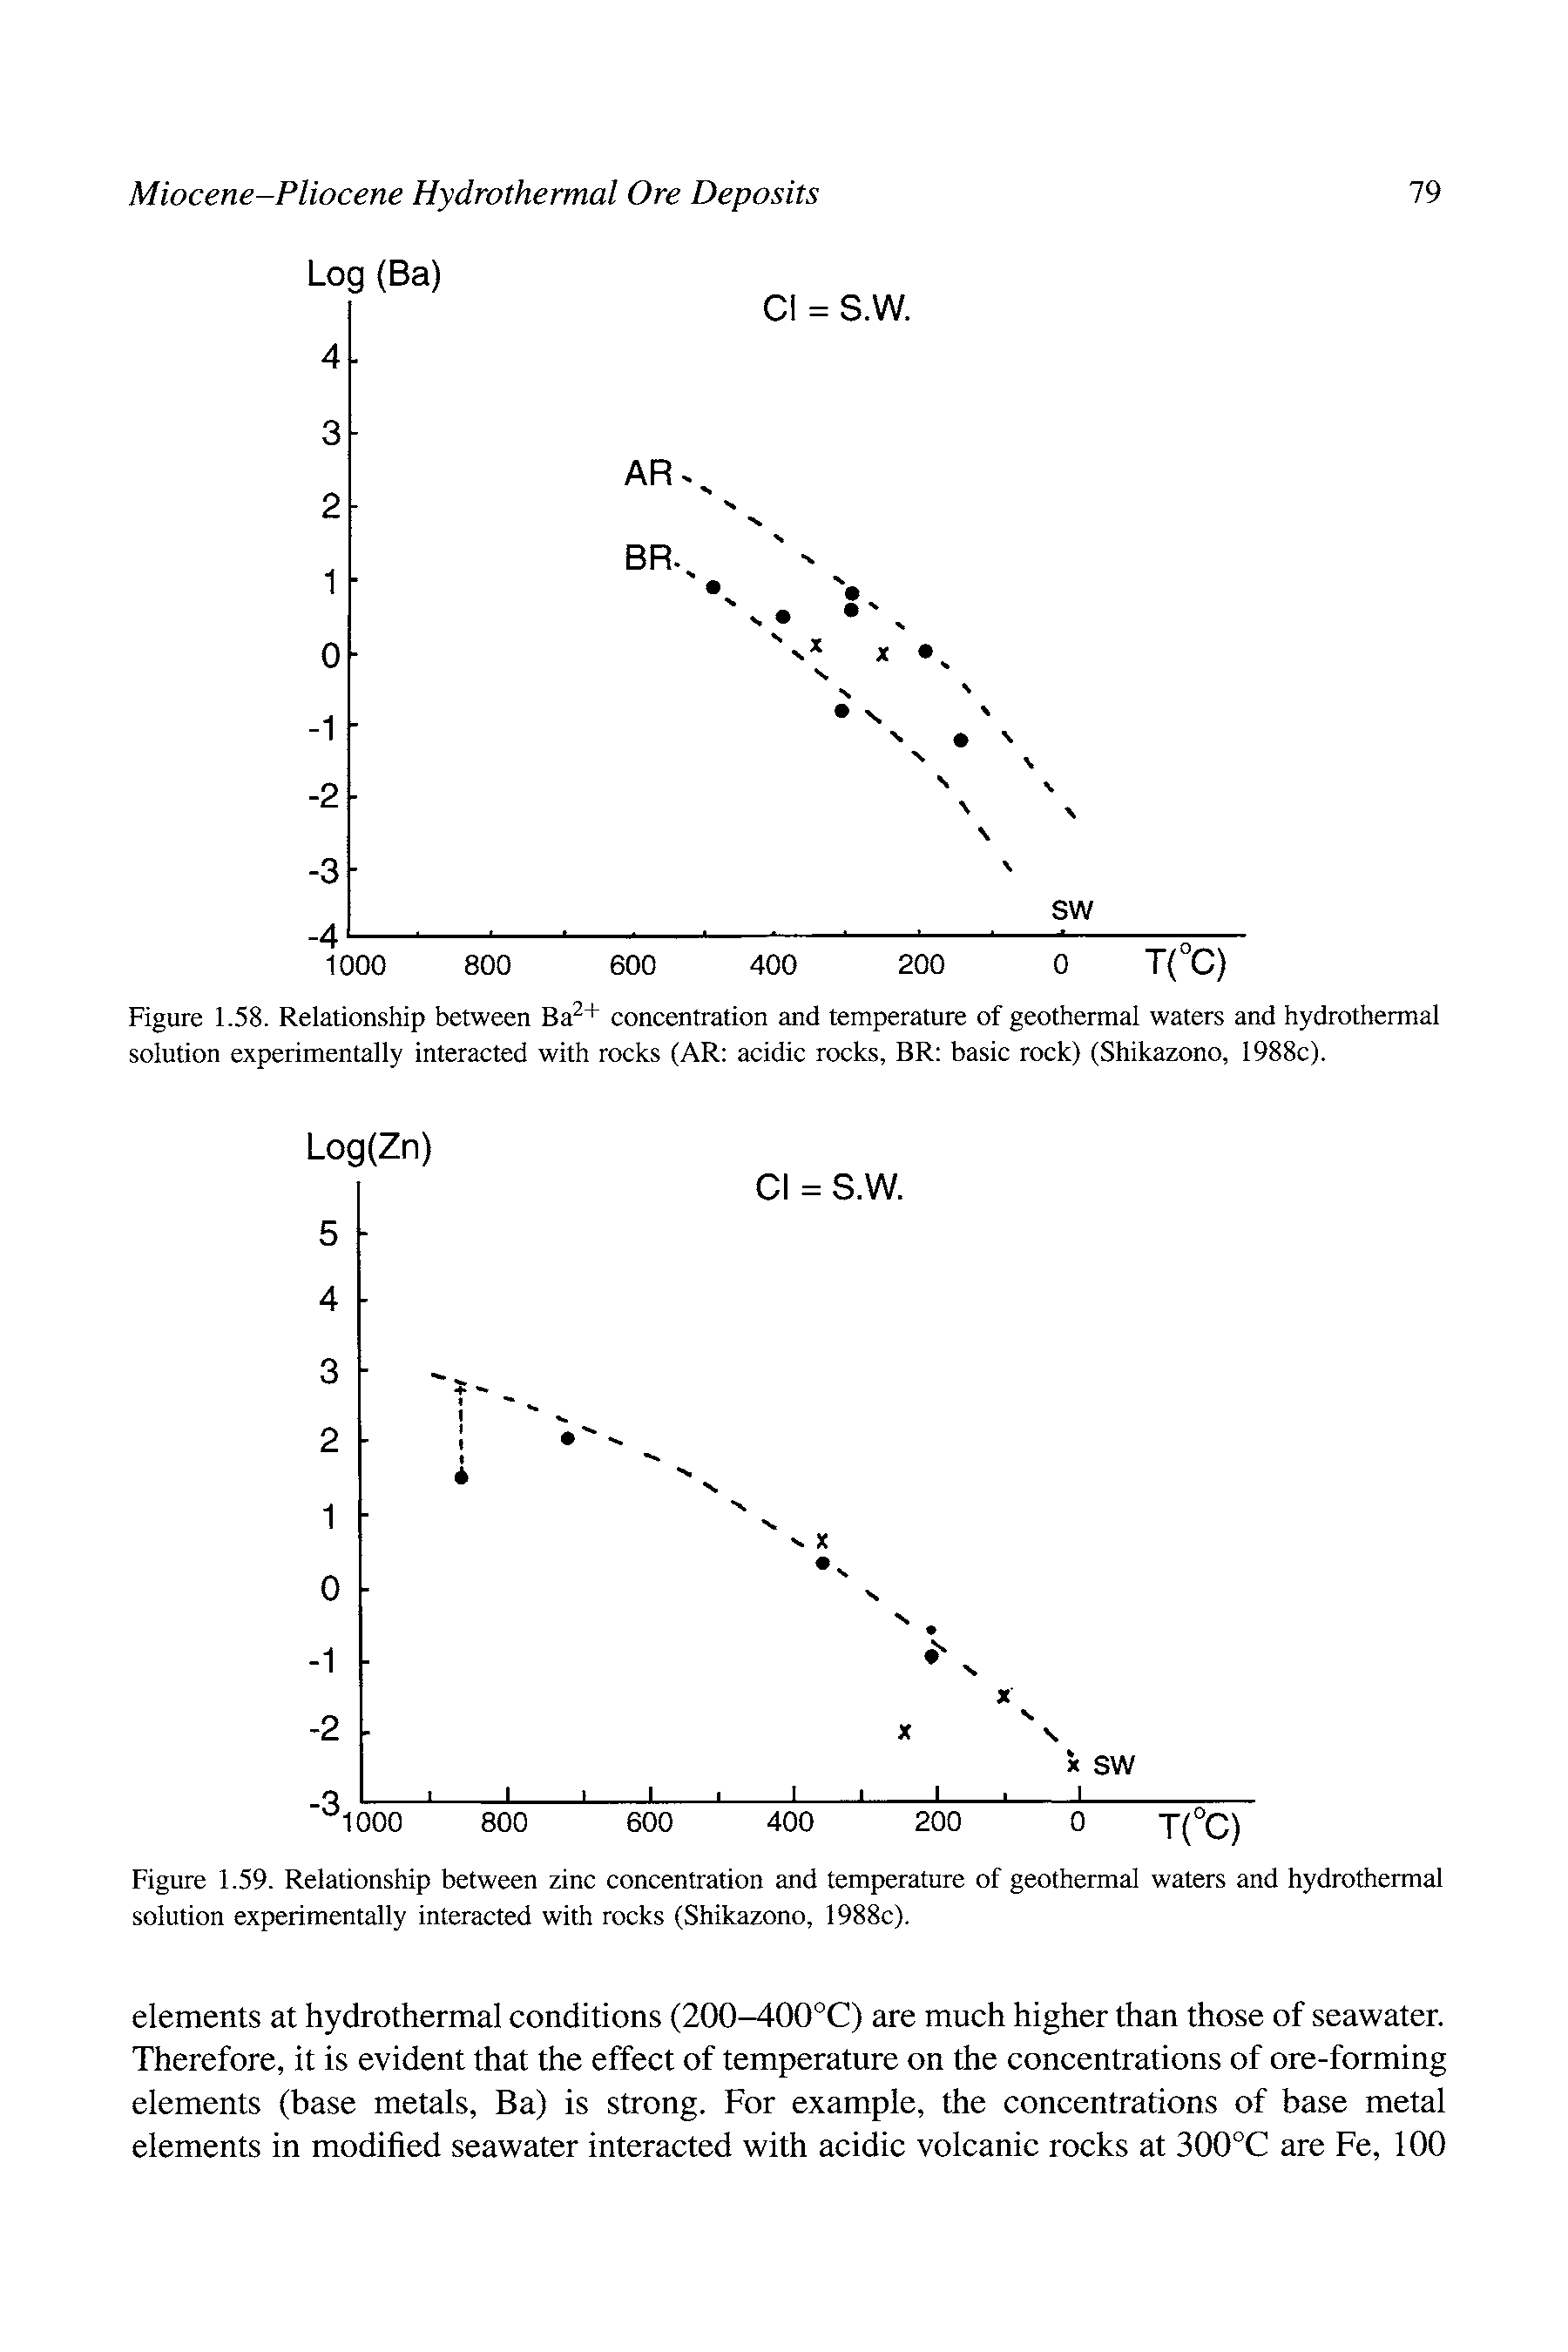 Figure 1.59. Relationship between zinc concentration and temperature of geothermal waters and hydrothermal solution experimentally interacted with rocks (Shikazono, 1988c).